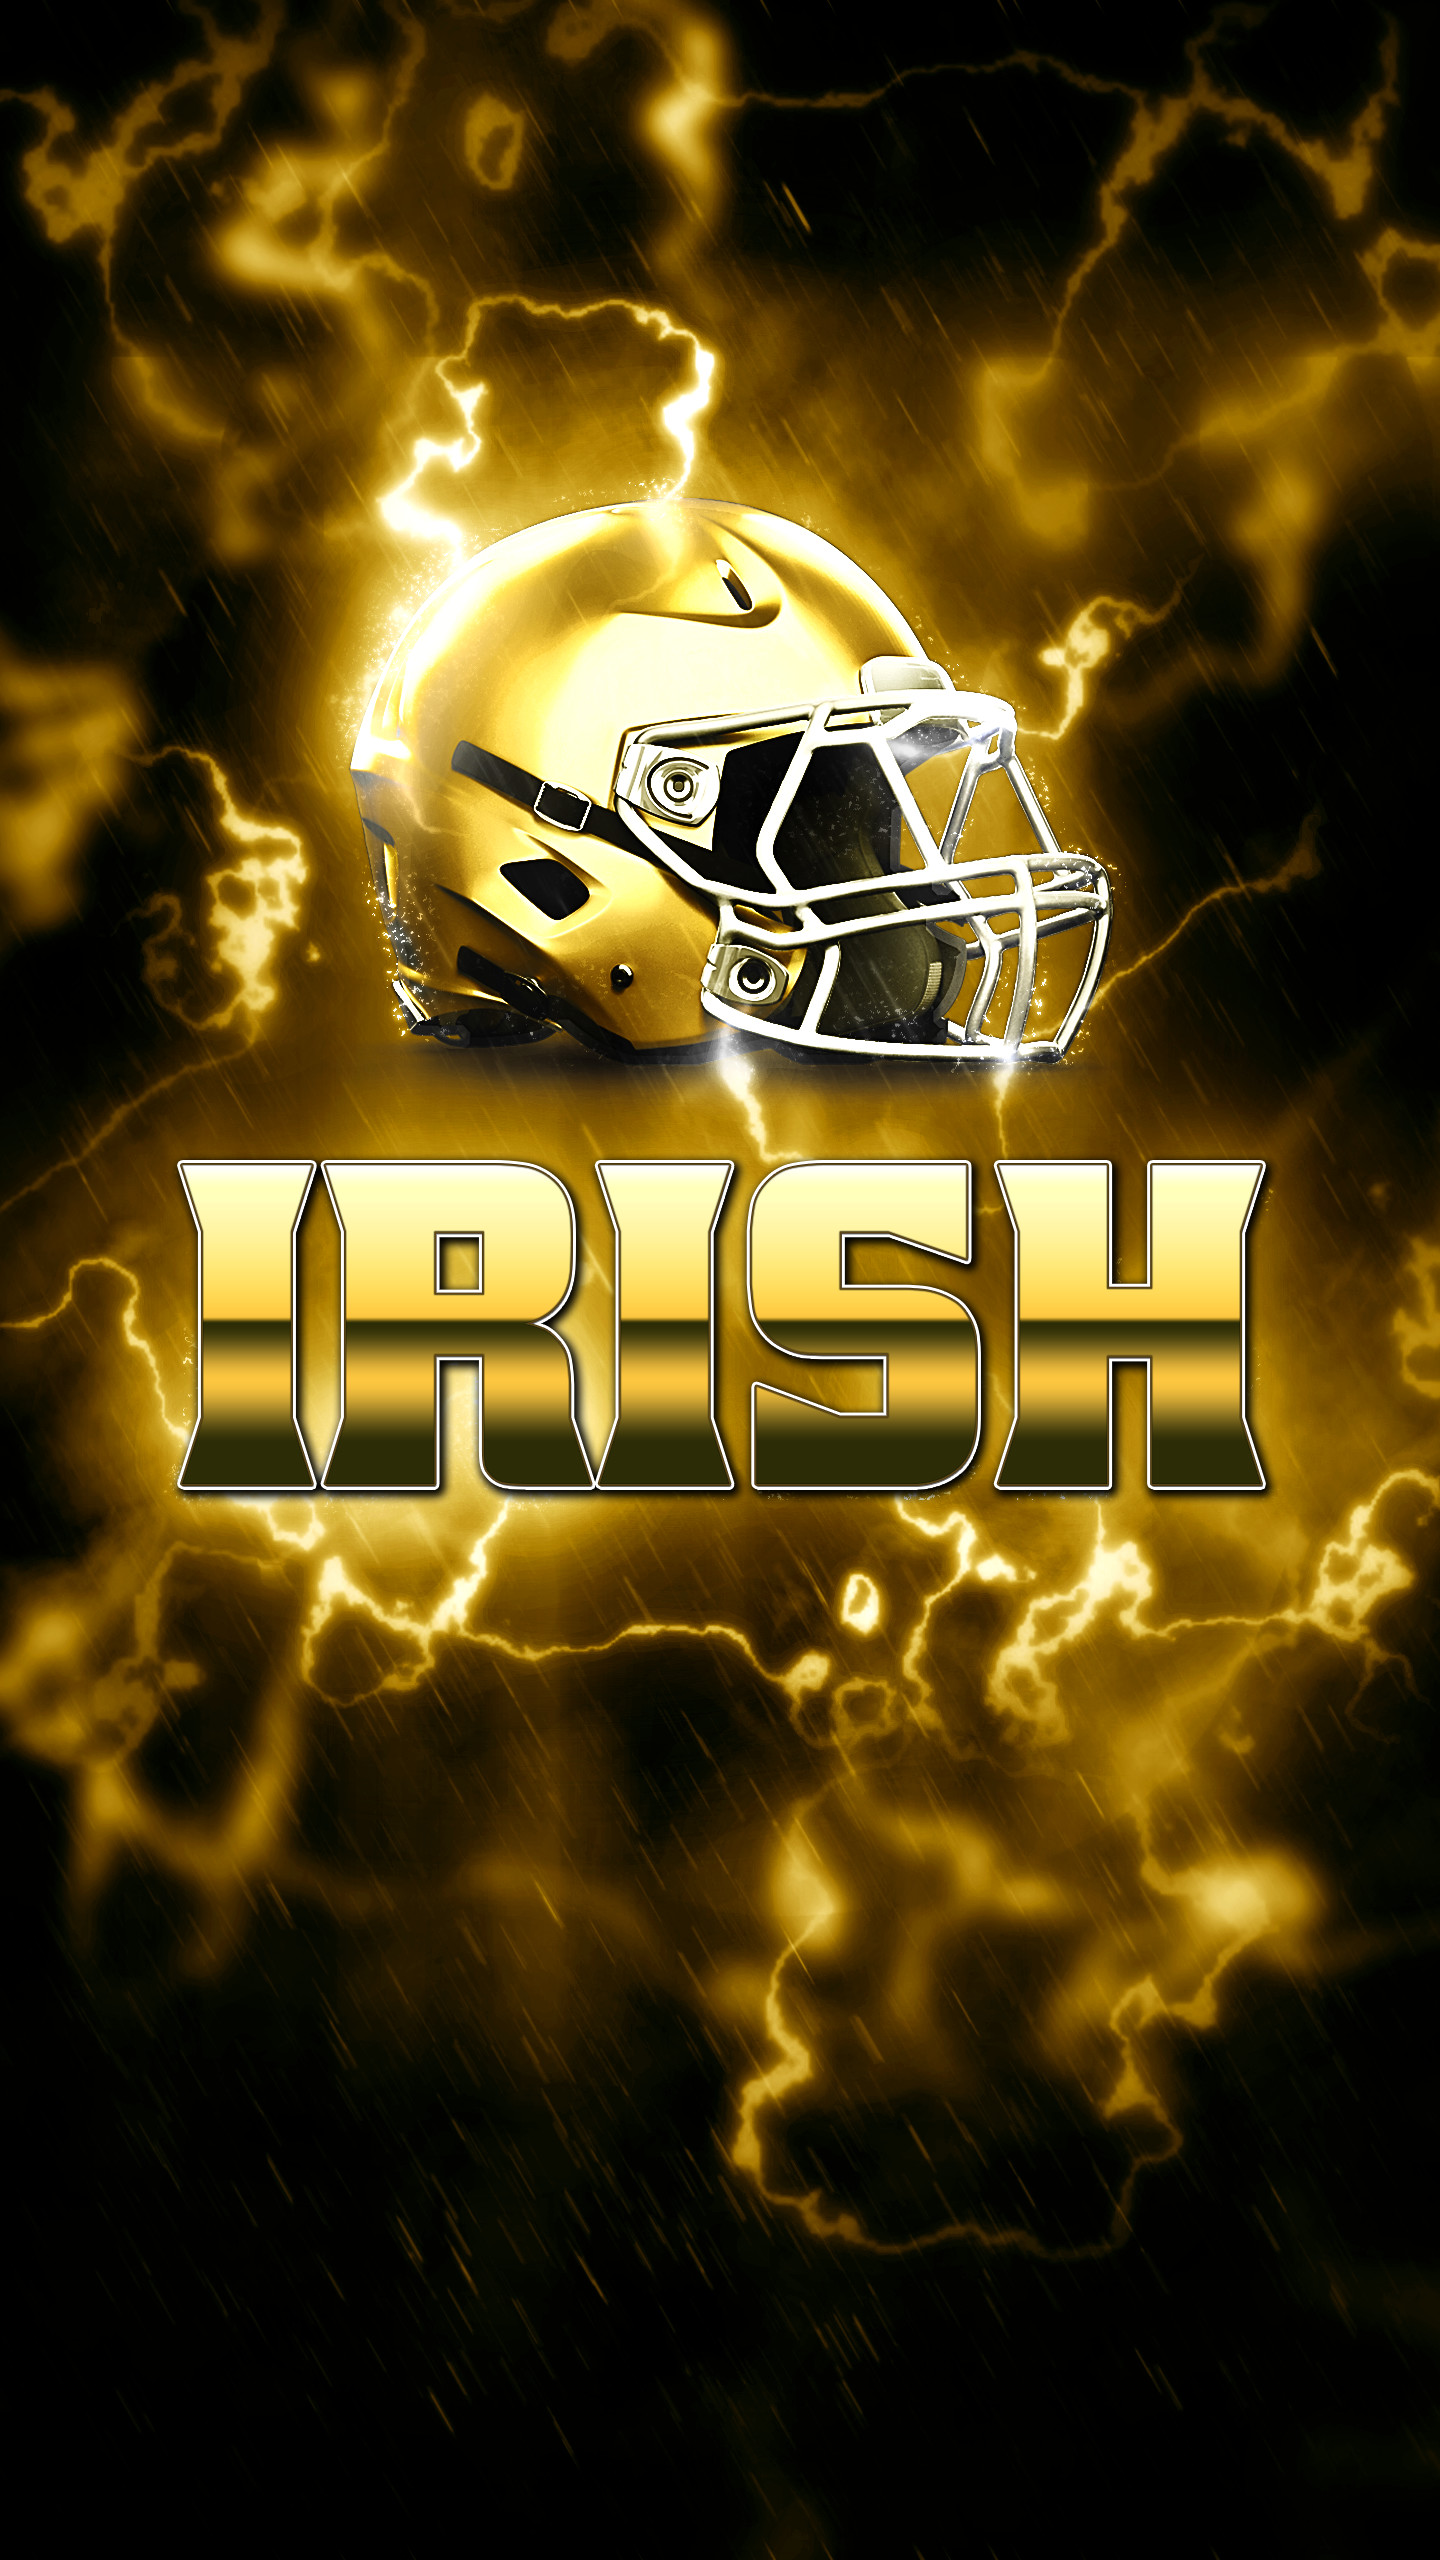 Notre Dame Fighting Irish Football Wallpapers  Wallpaper Cave